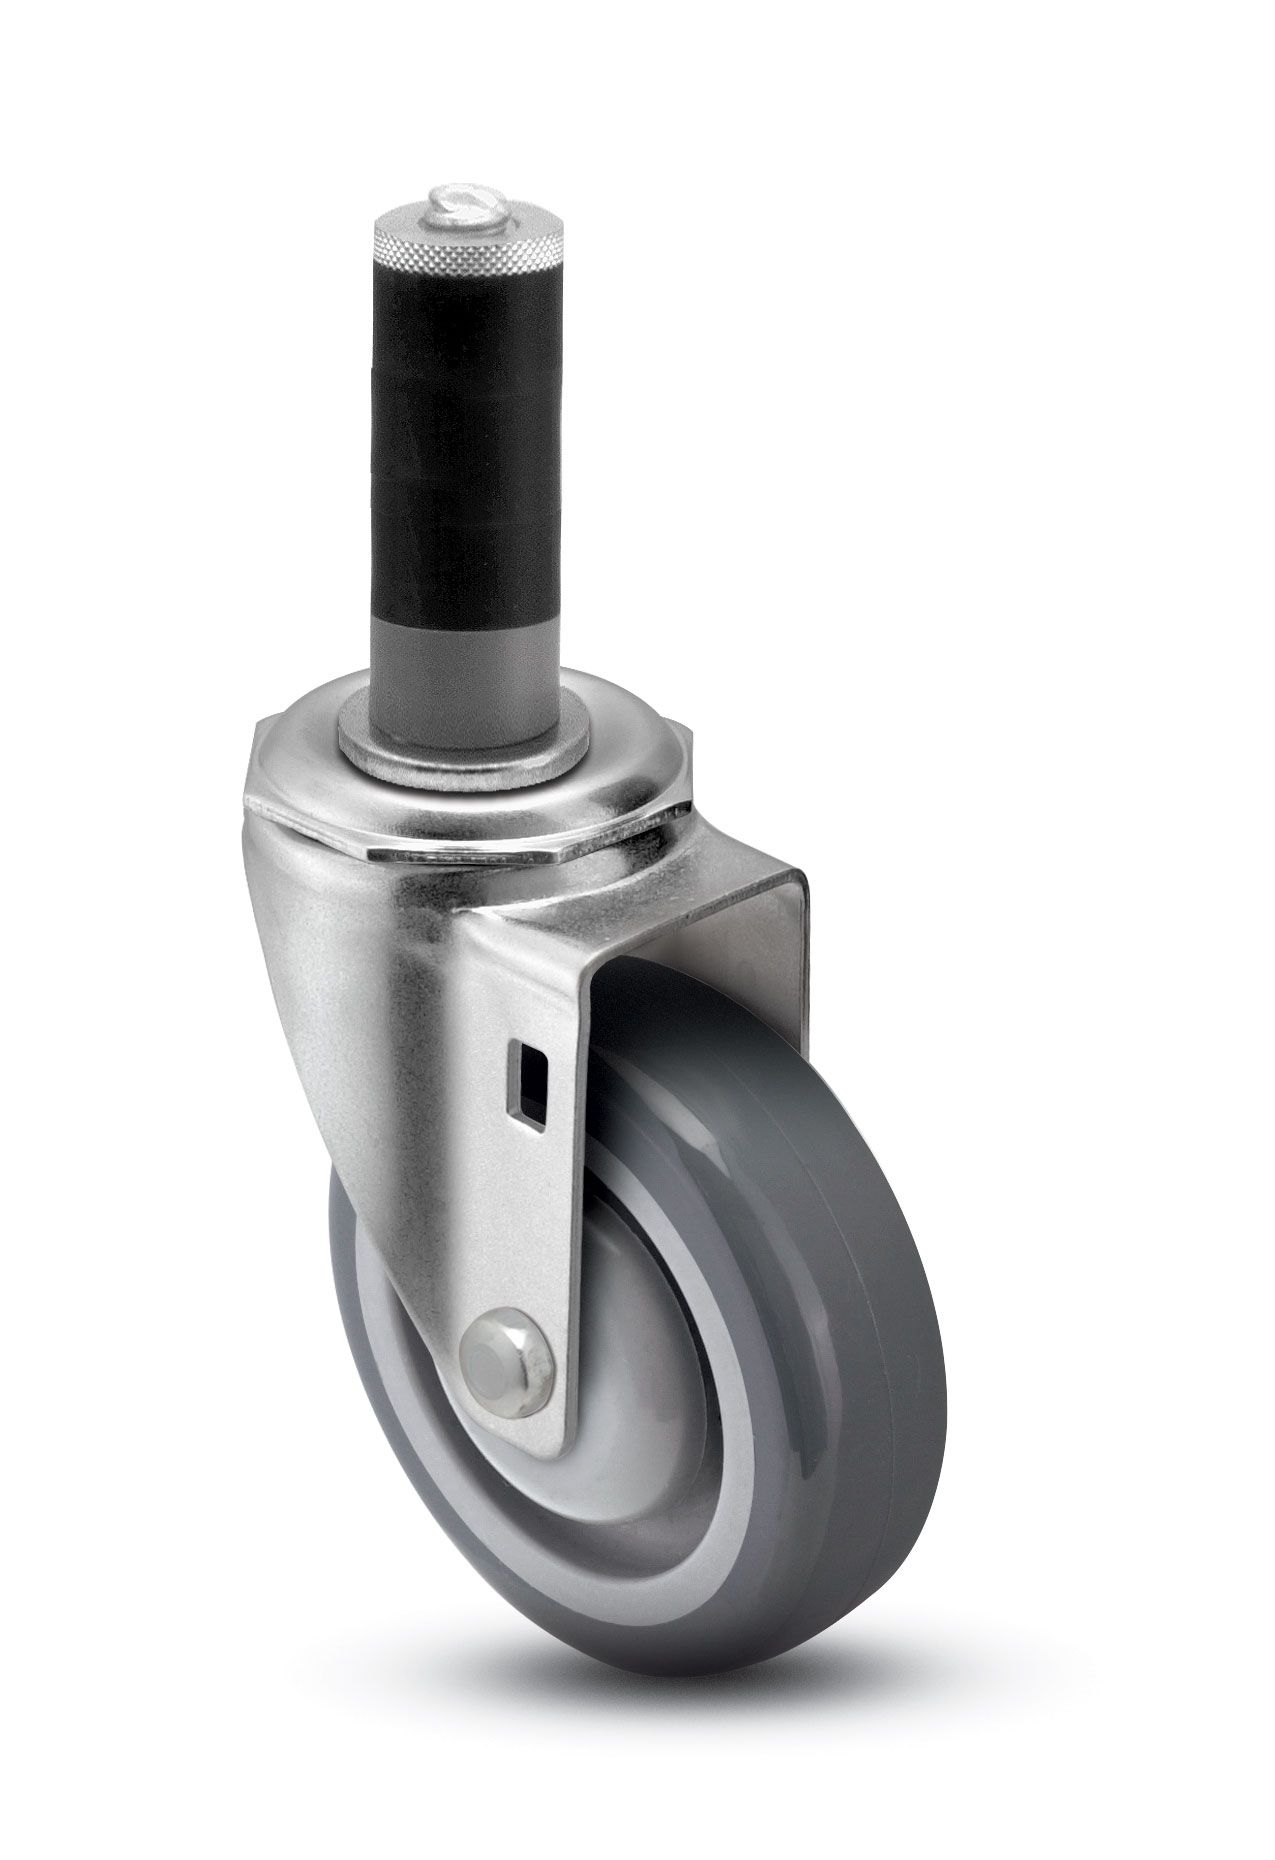 Caster; Swivel; 5" x 1-1/4"; TPR Rubber; Expandable Adapter (7/8" - 15/16" ID tubing); Zinc; Precision Ball Brng; 300#; Total Lock; Dust Cover (Item #65059)